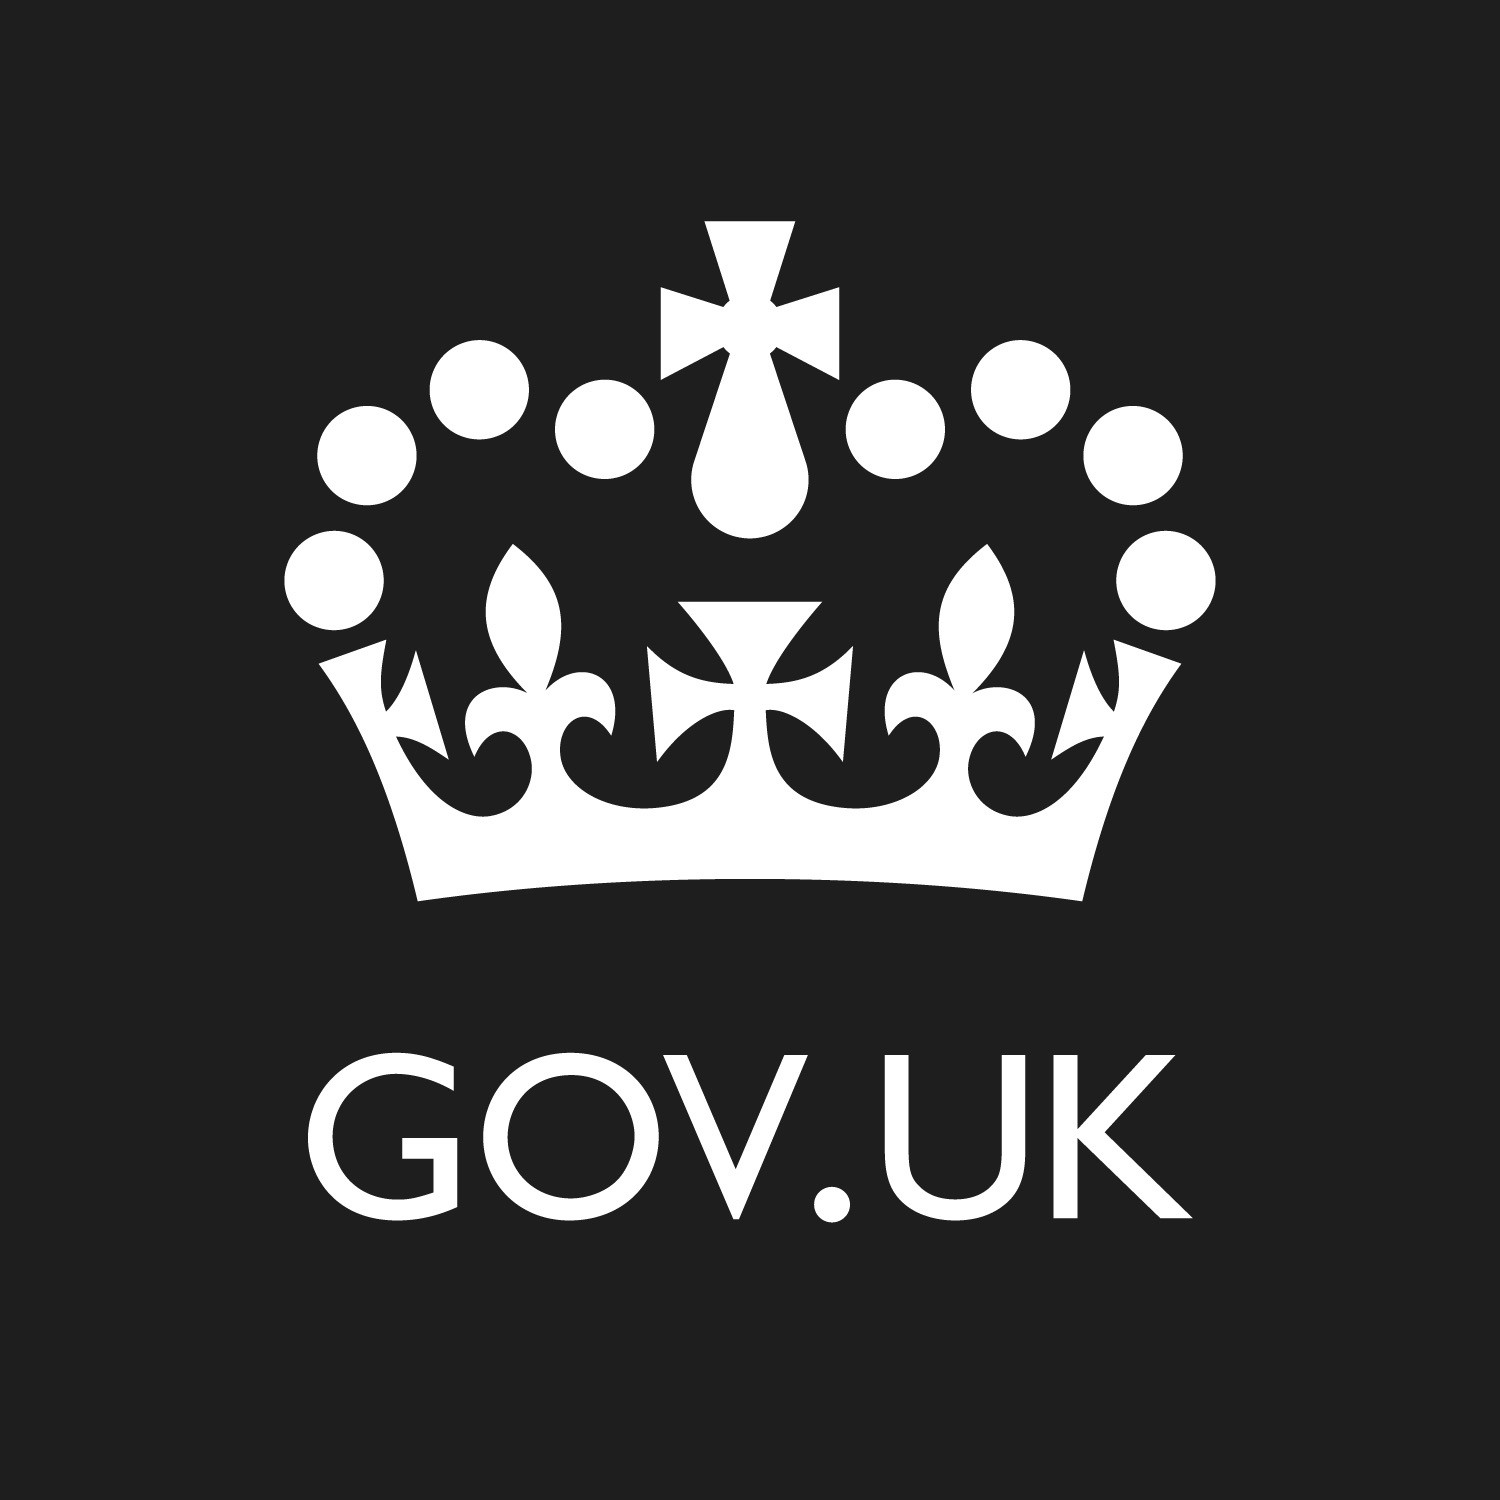 An image of the UK Government logo (White Crown on black background)